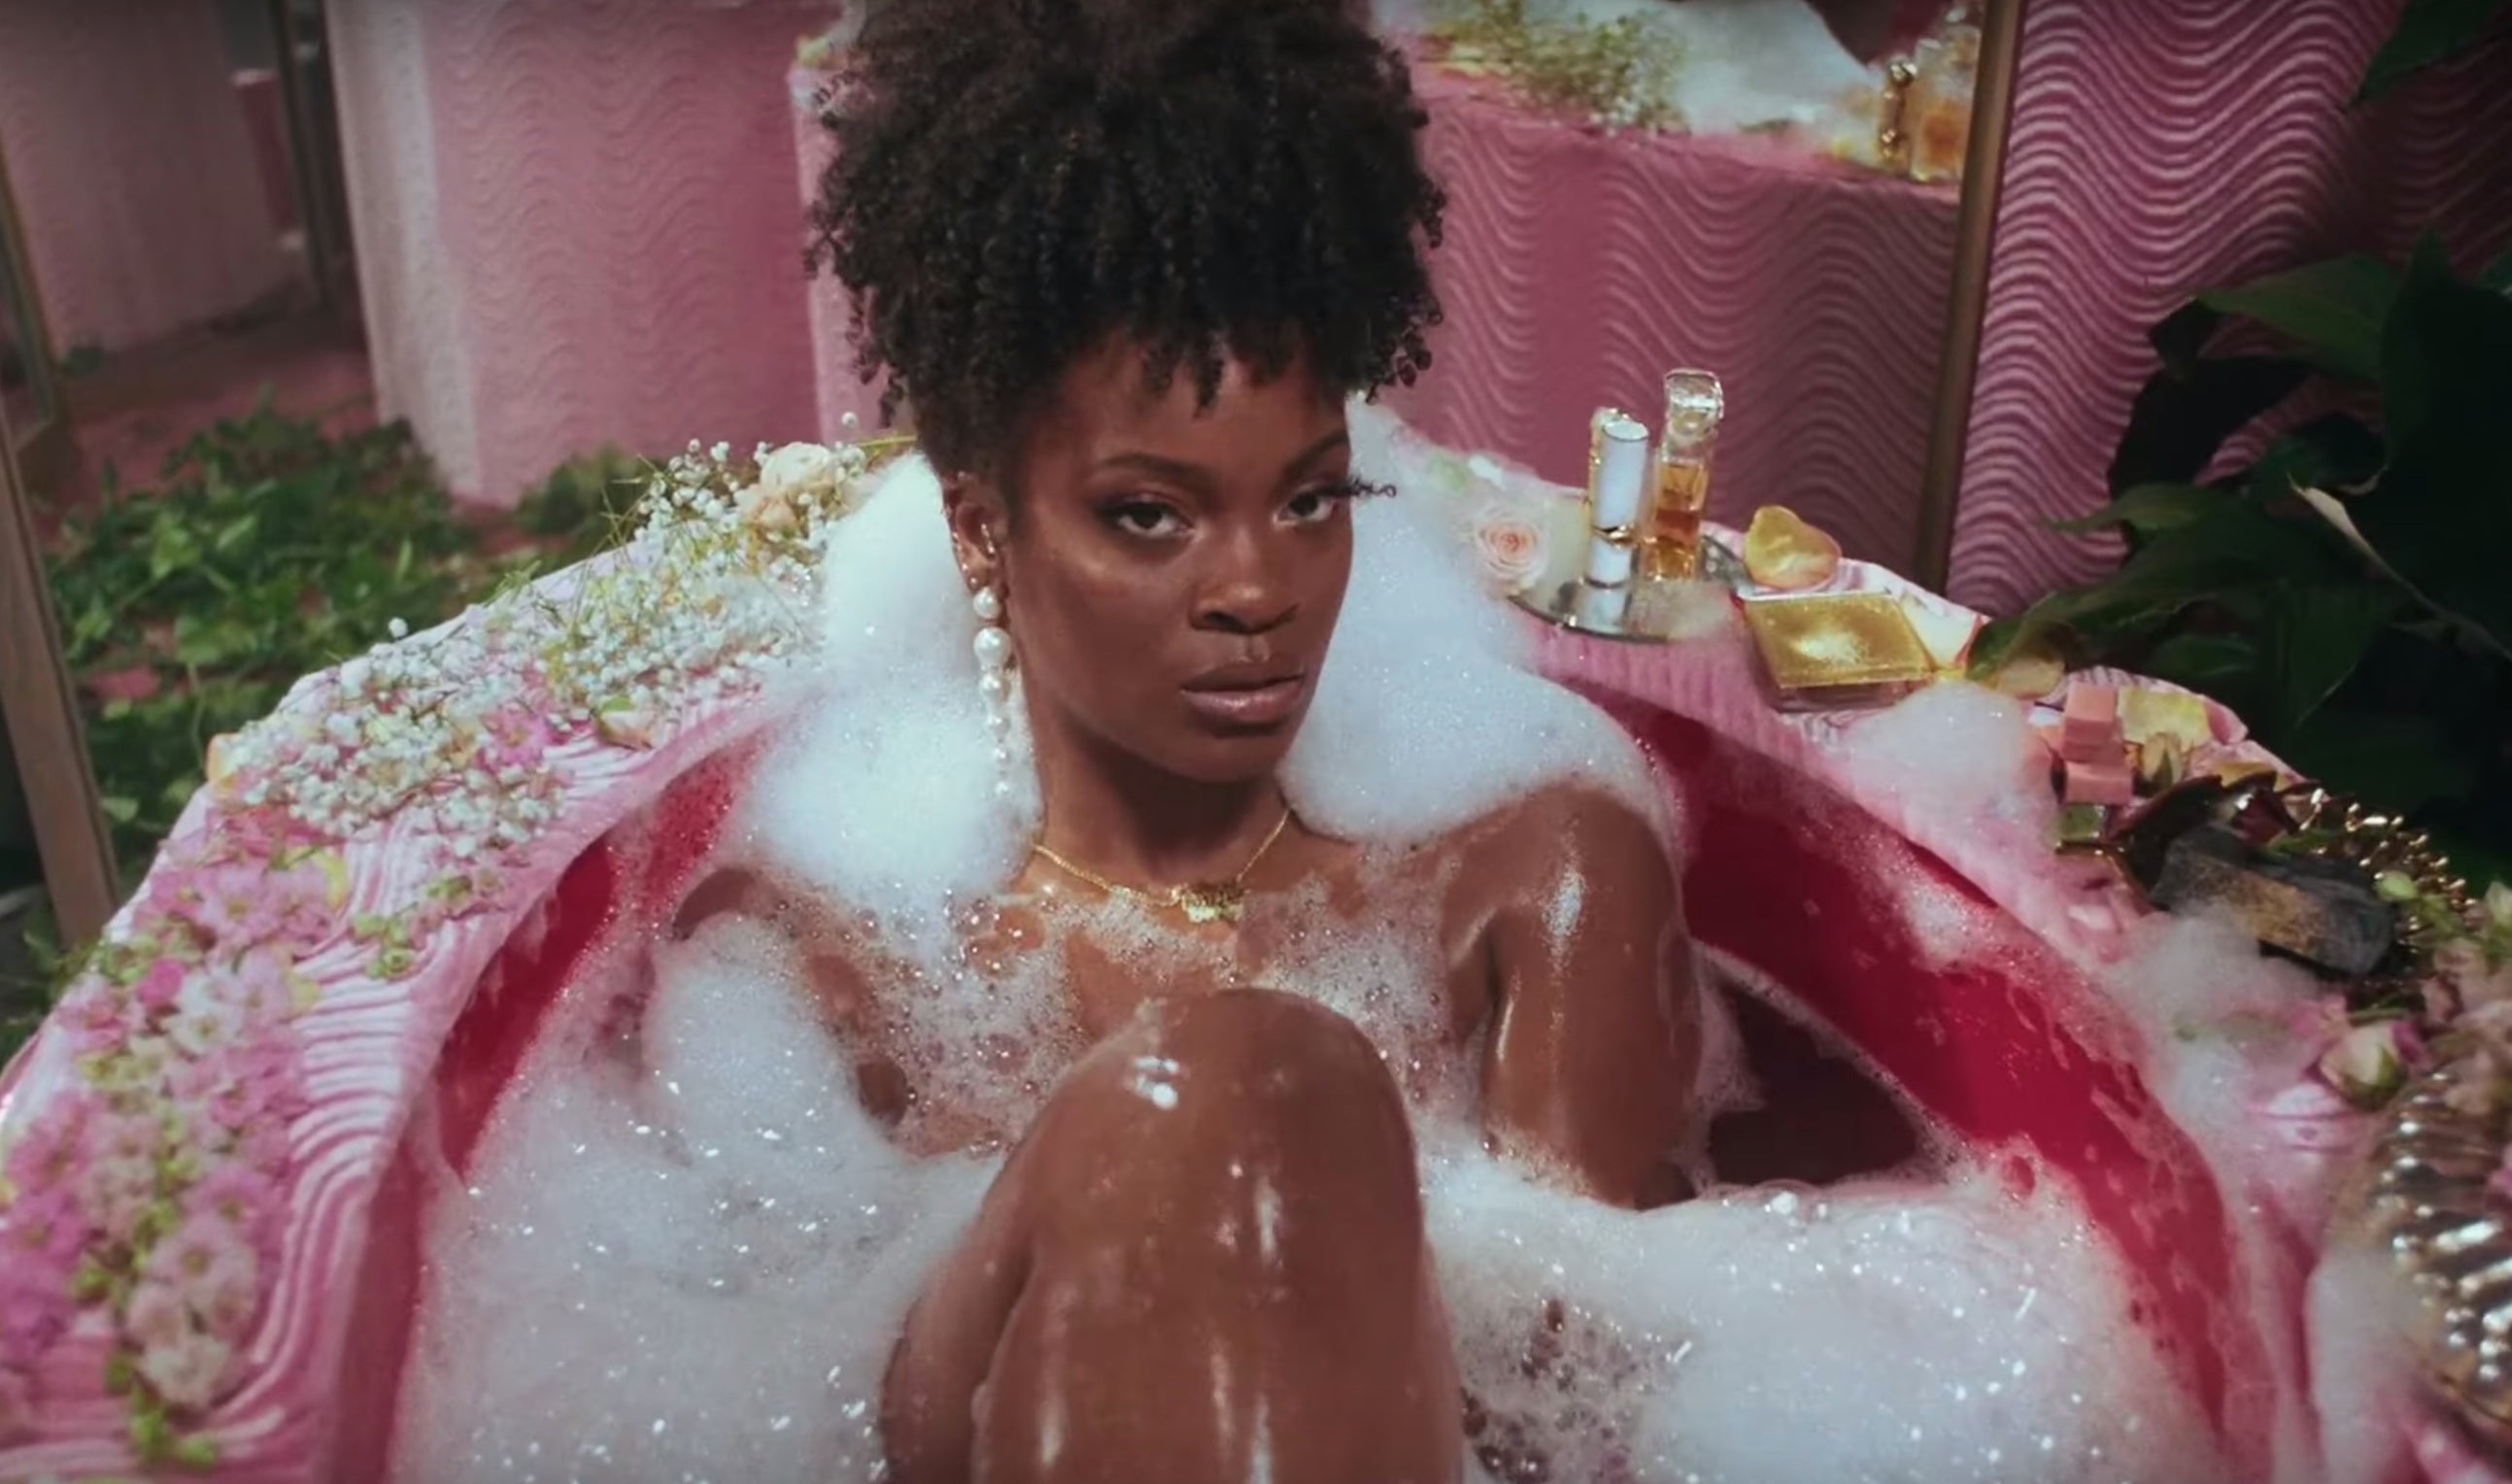 Ari Lennox Pays Homage To Missy Elliott And Total In New Music Video For 'BMO'